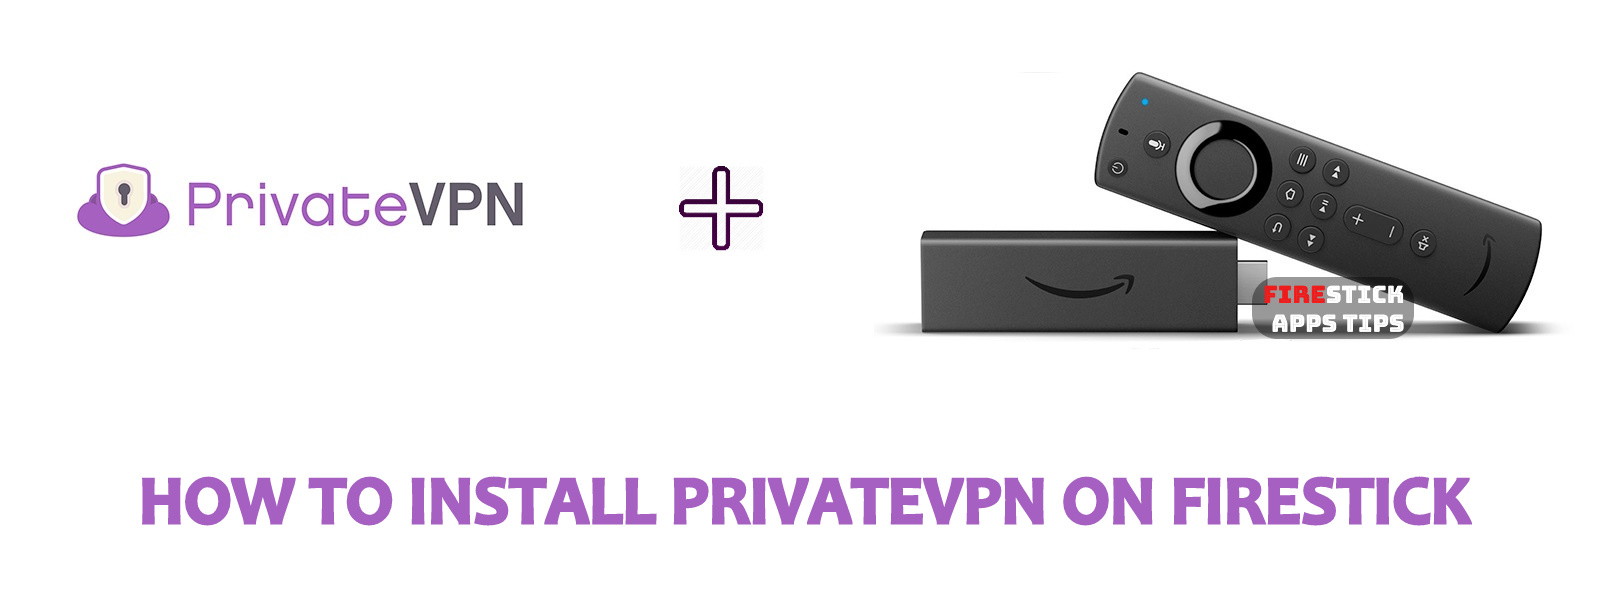 How to Install PrivateVPN for Firestick [2021]